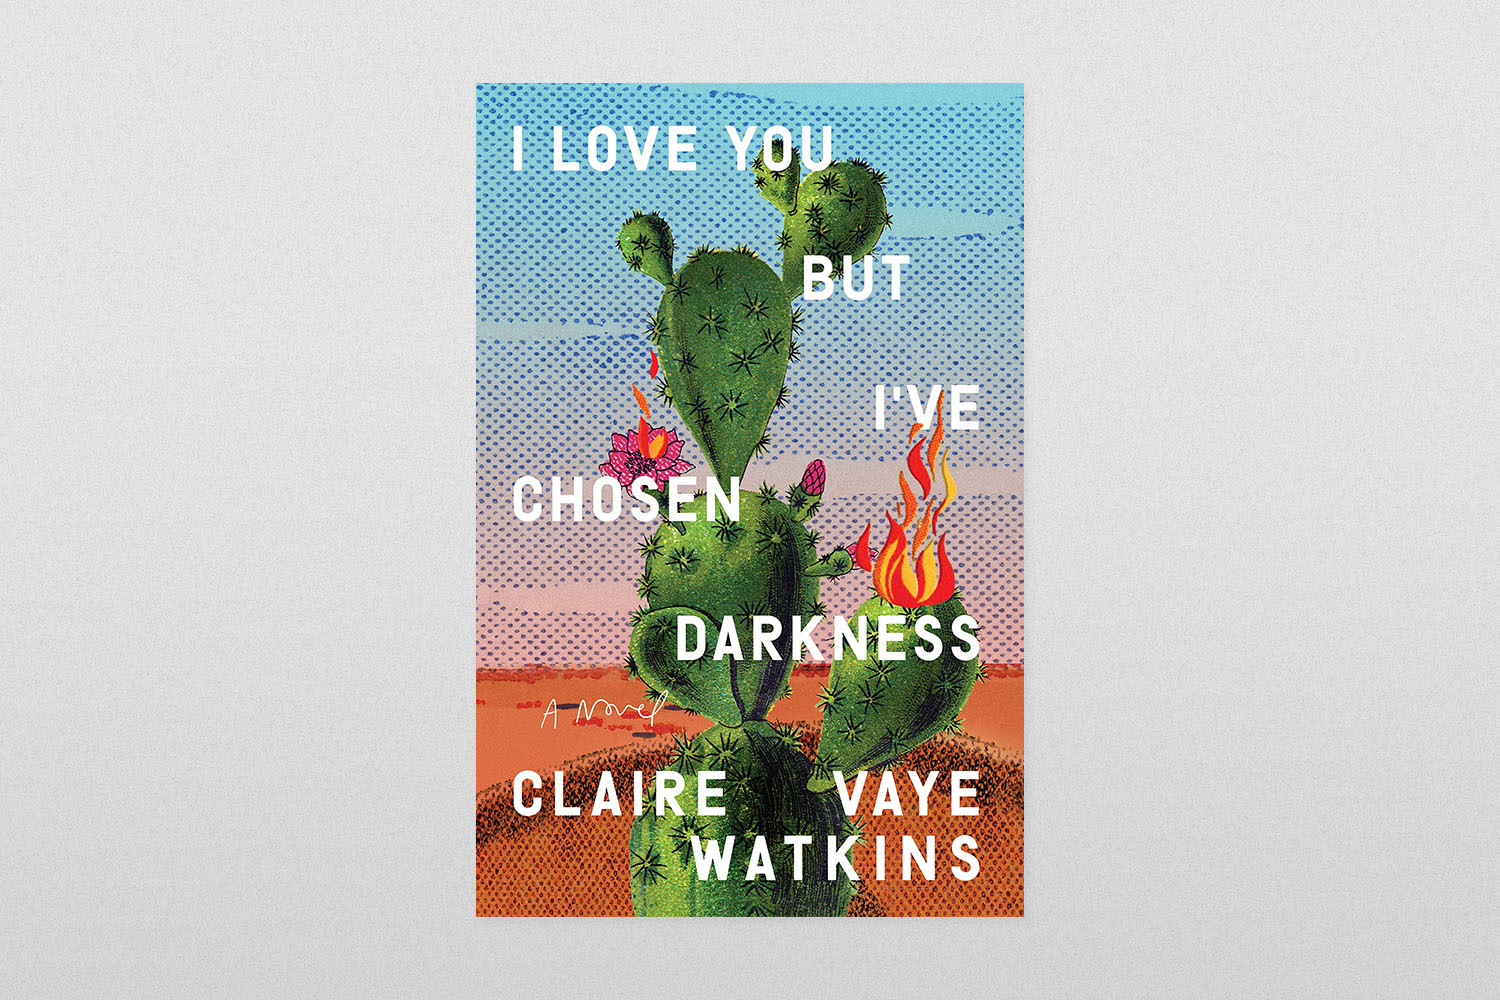 "I Love You But I’ve Chosen Darkness" cover